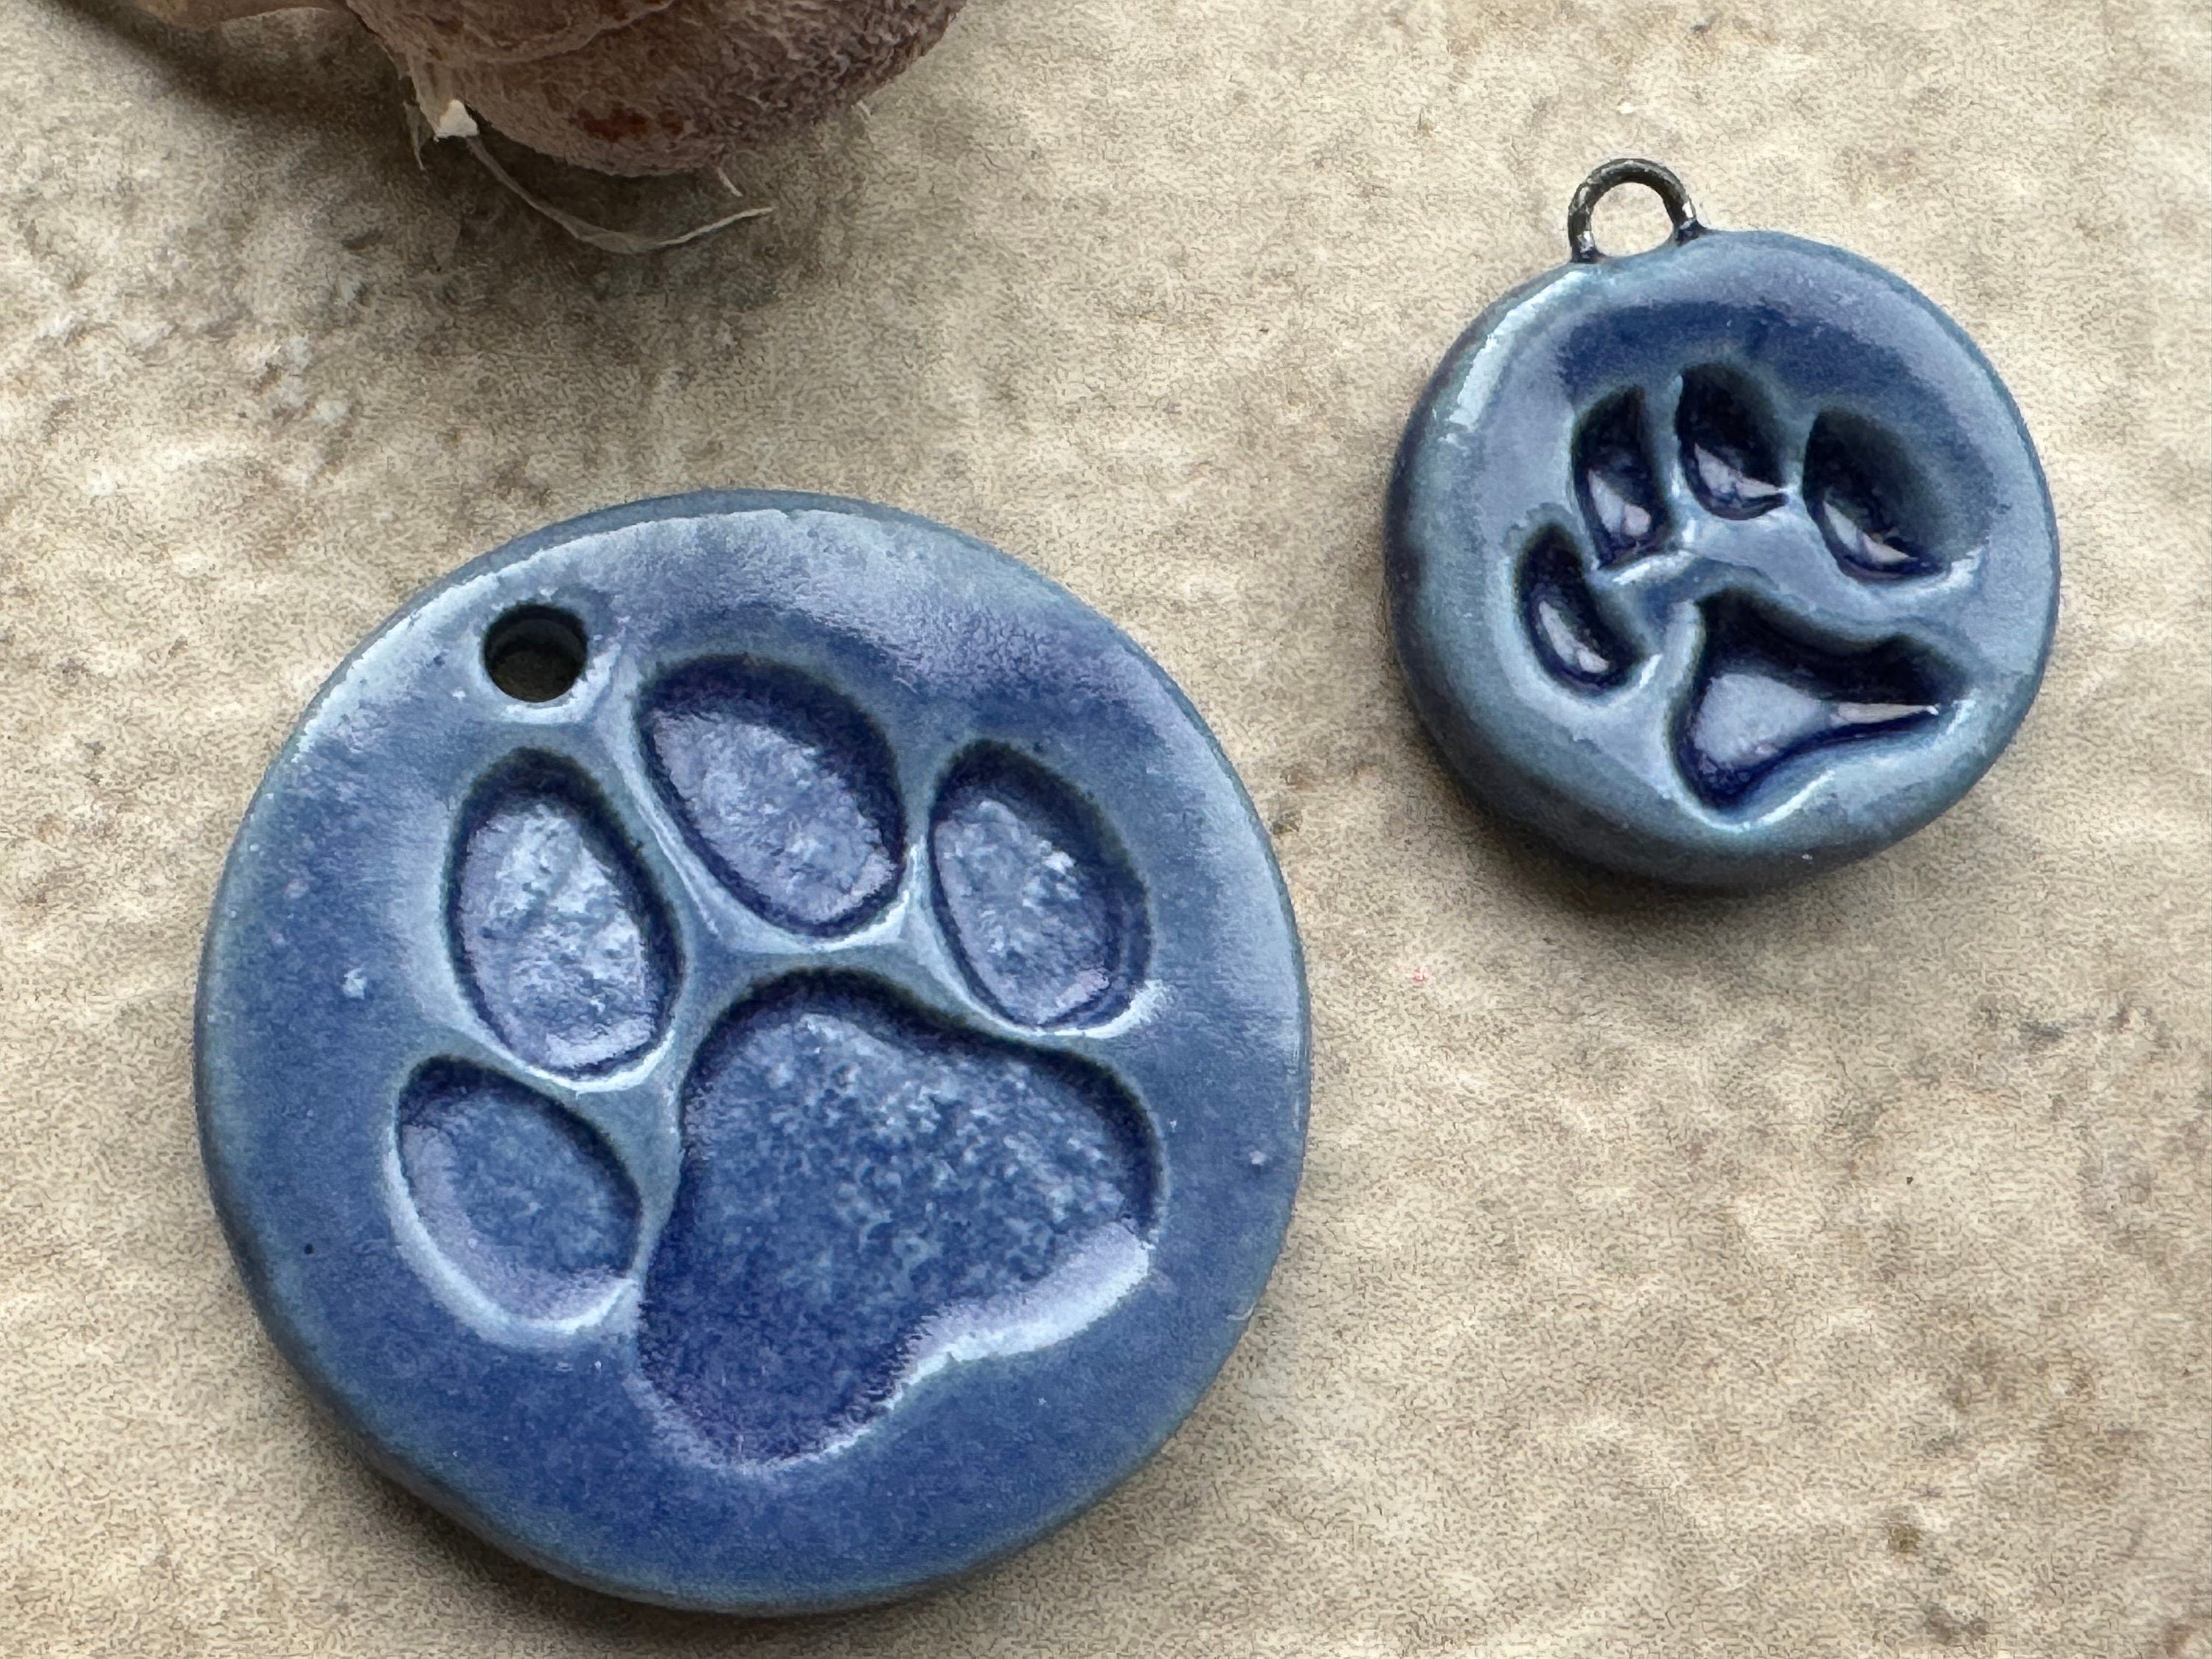 Blue Paw Print Pendant and Charms, Dog Round Pendant, Porcelain Ceramic Pendant, Dog Paw Charms, Jewelry Making Components